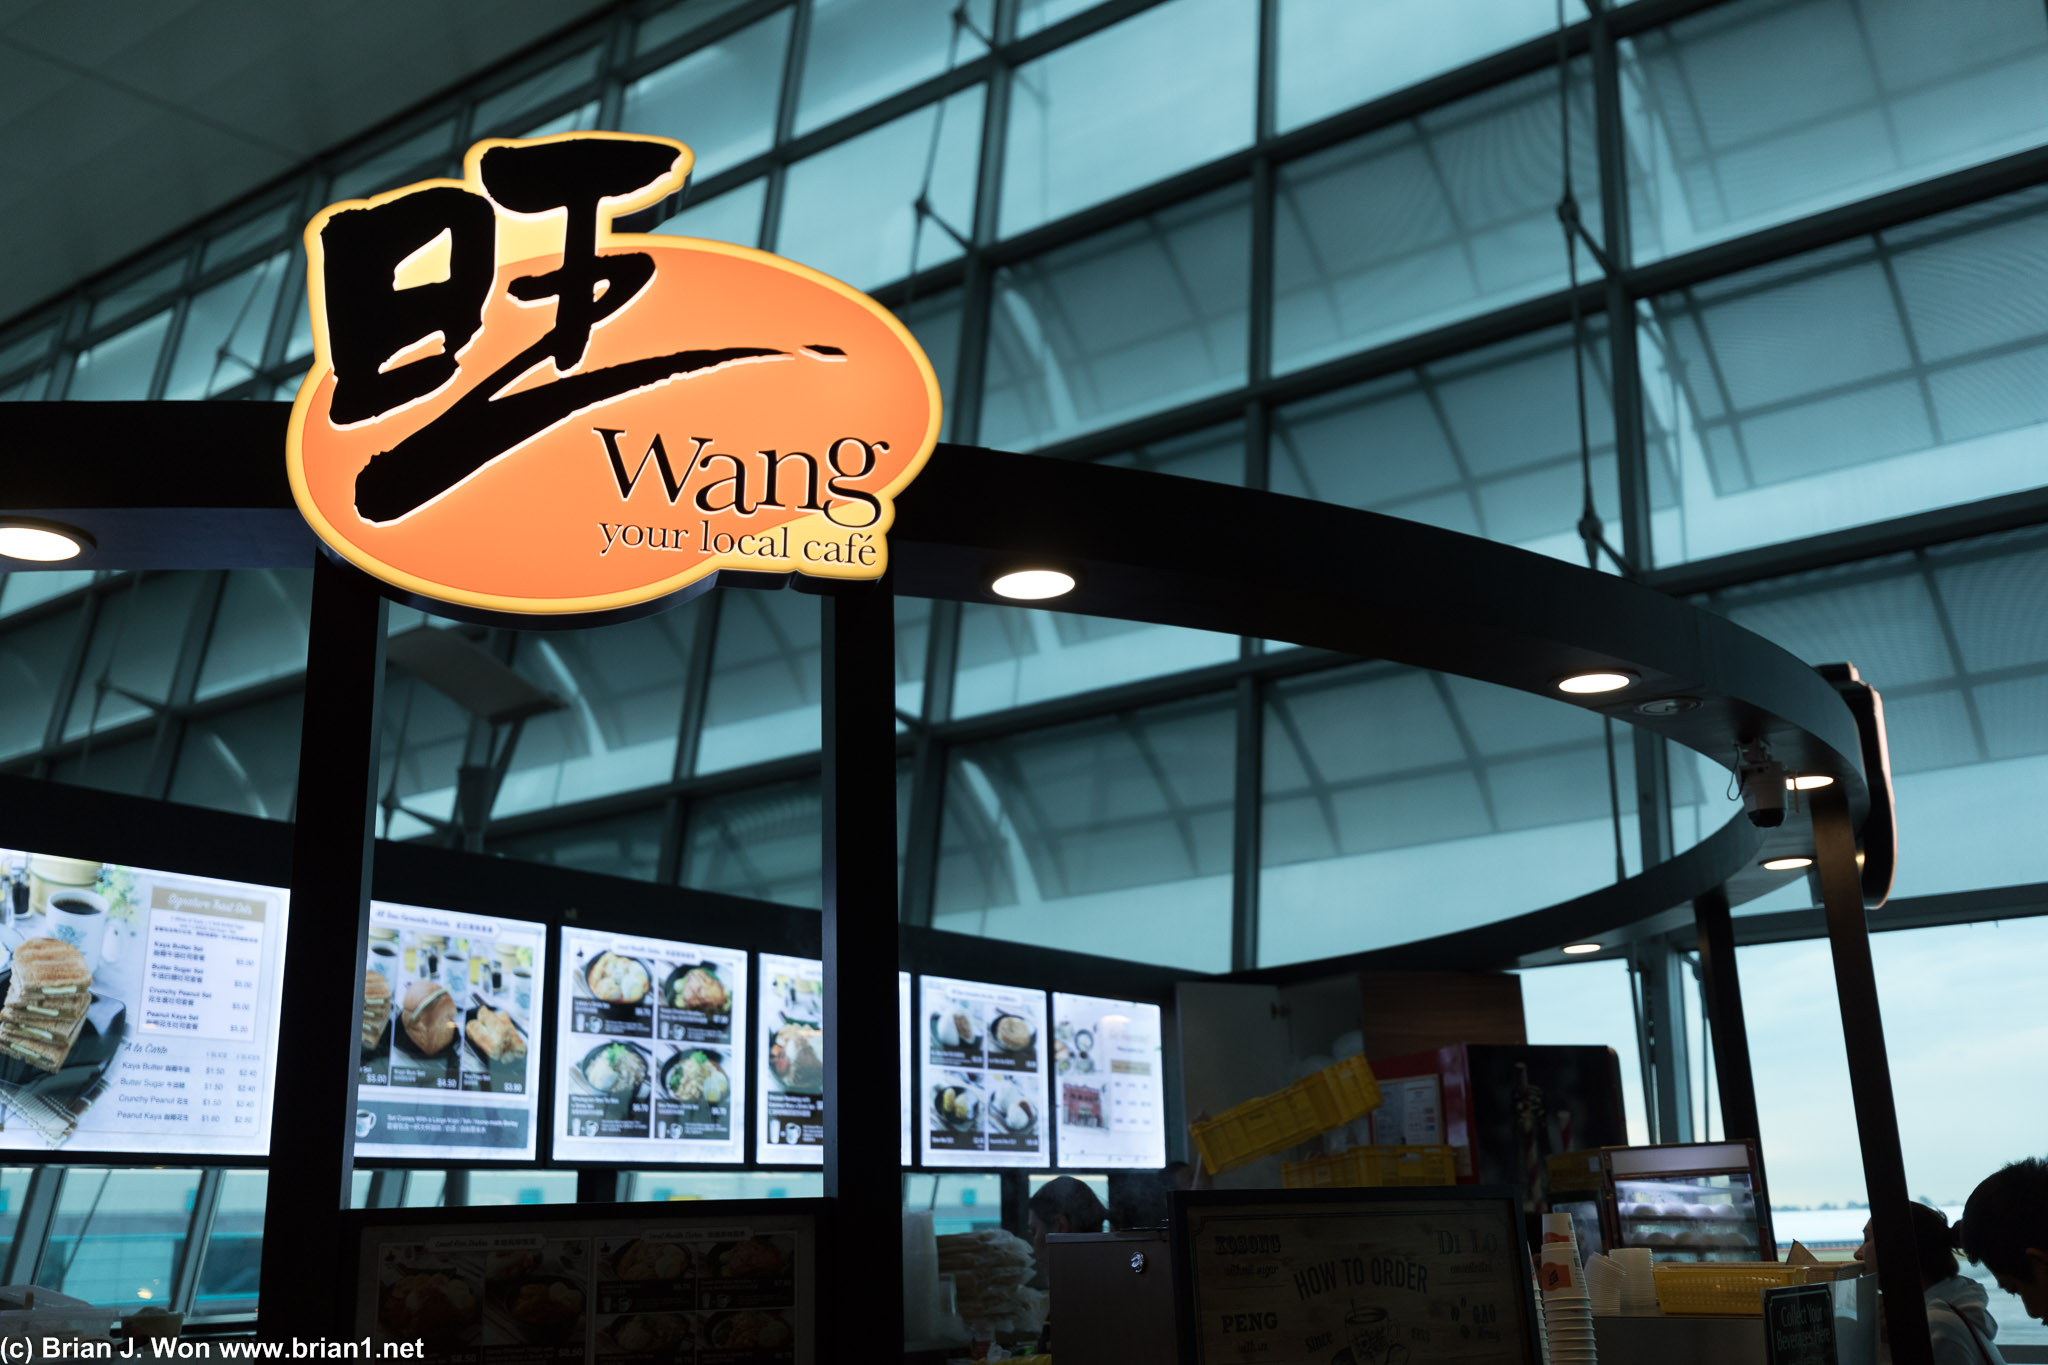 Dining options inside Changi Airport terminal 2.